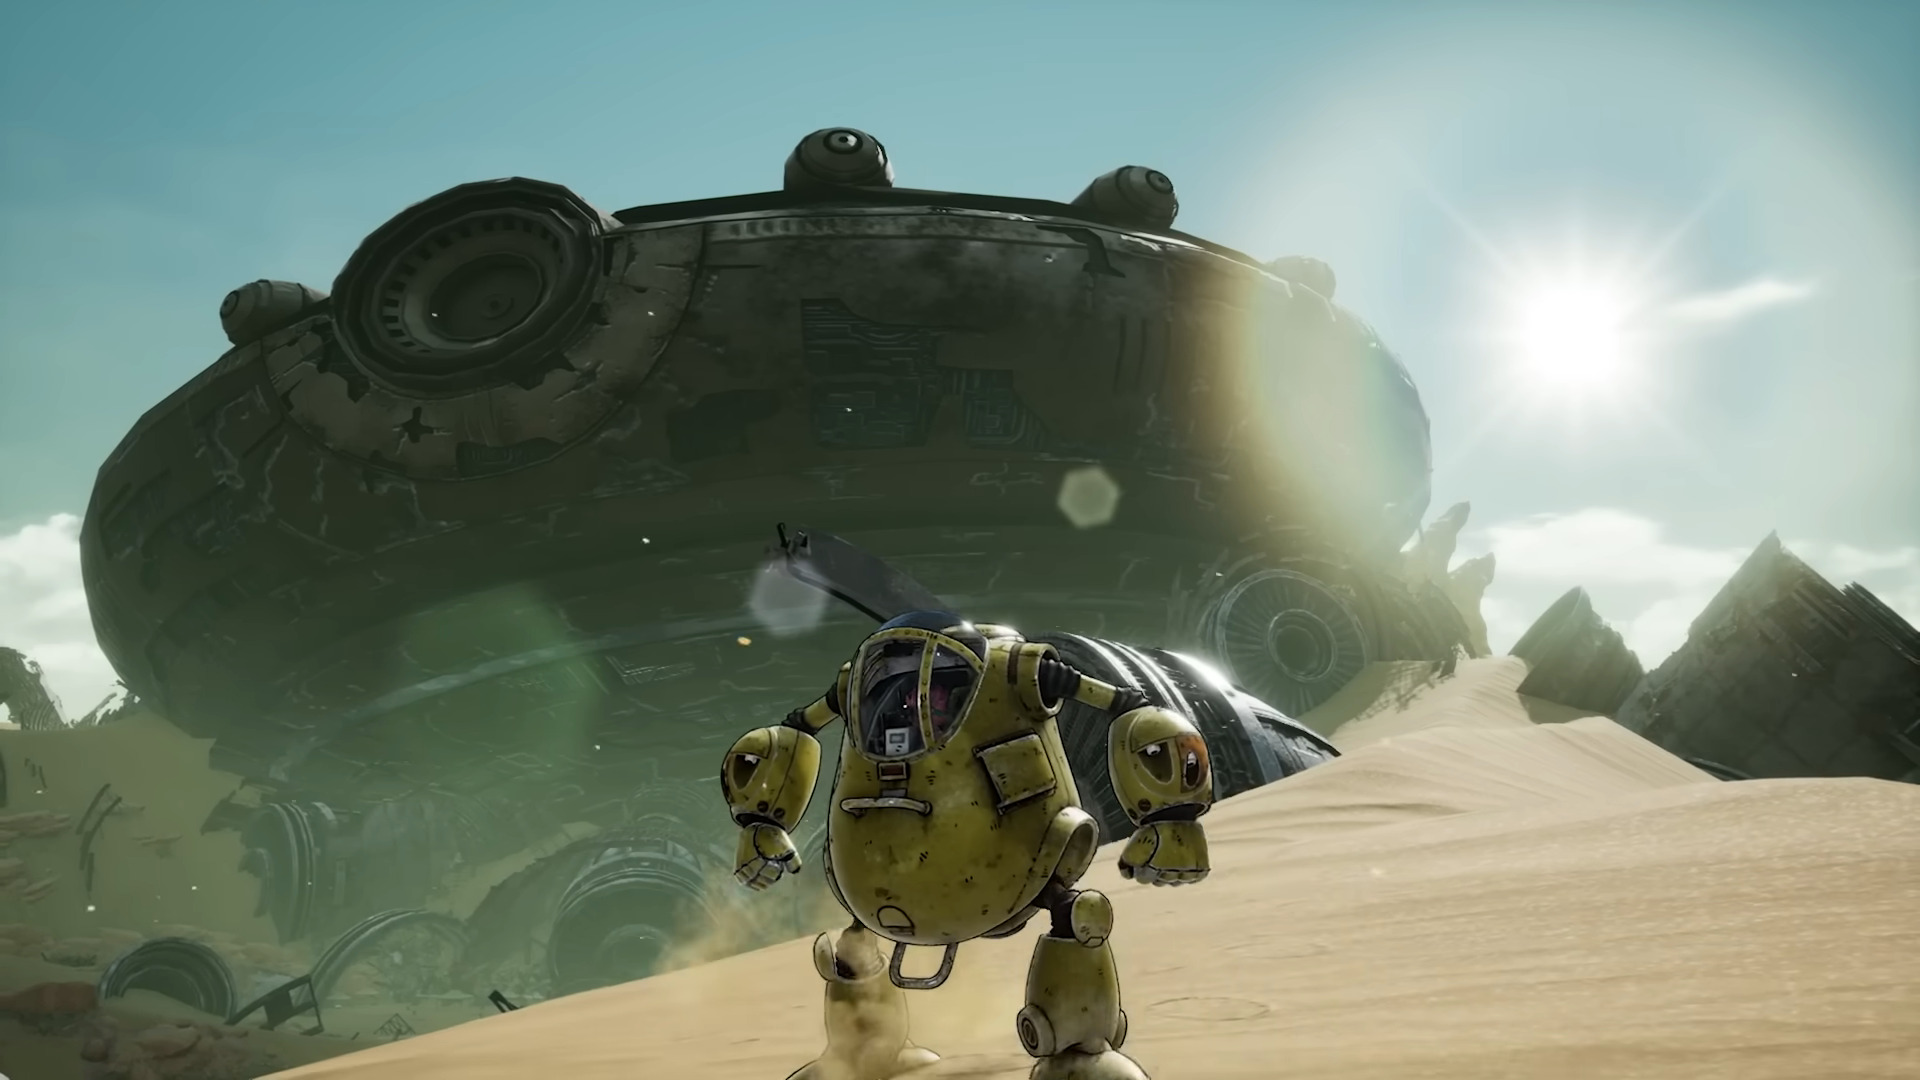 Beezlebub treks across the wastes in a mechanized suit in Sand Land (2023), Bandai Namco